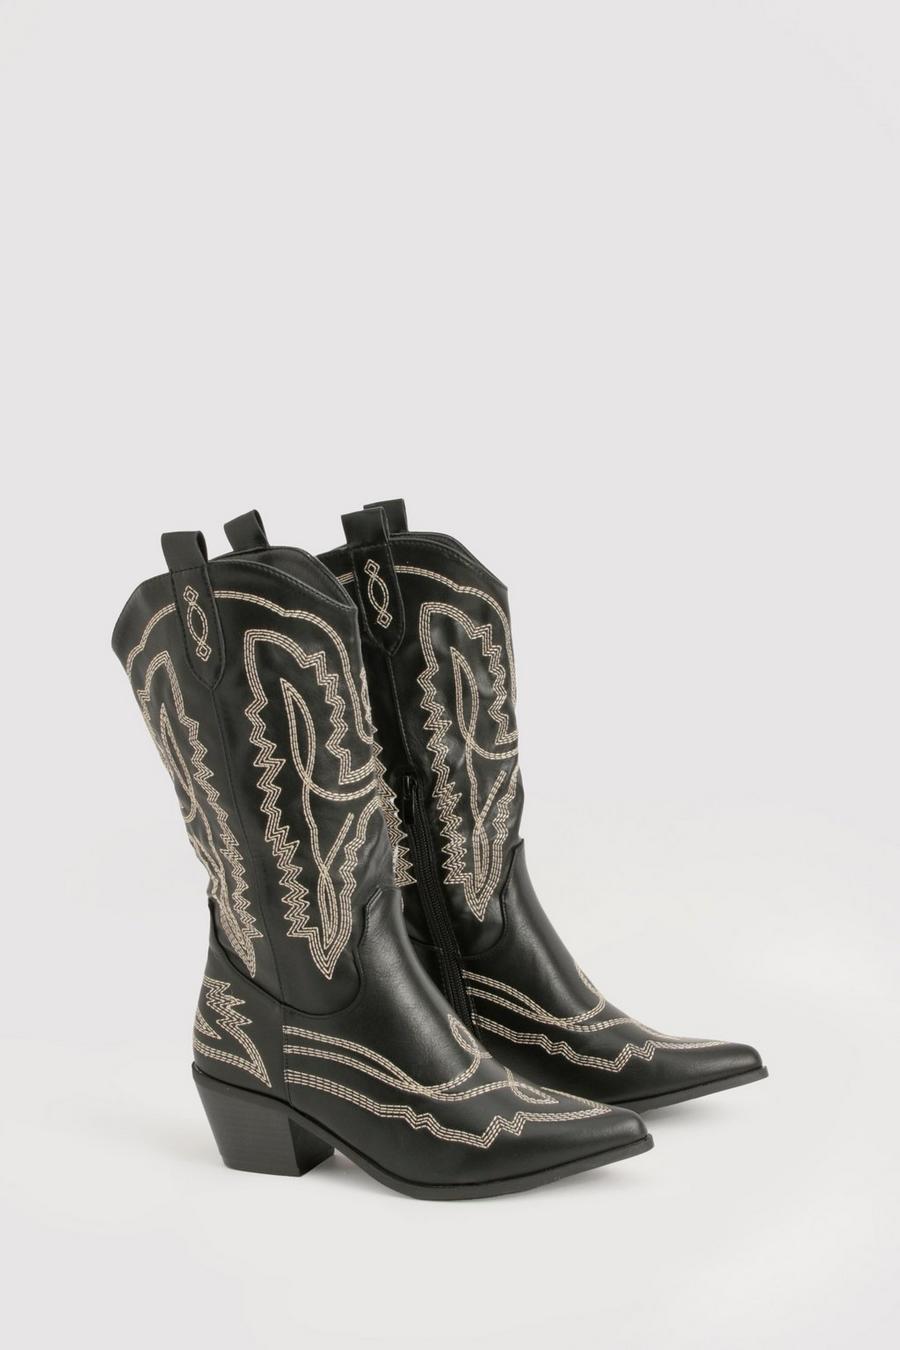 Black Contrast Stitching Western Cowboy Boots    